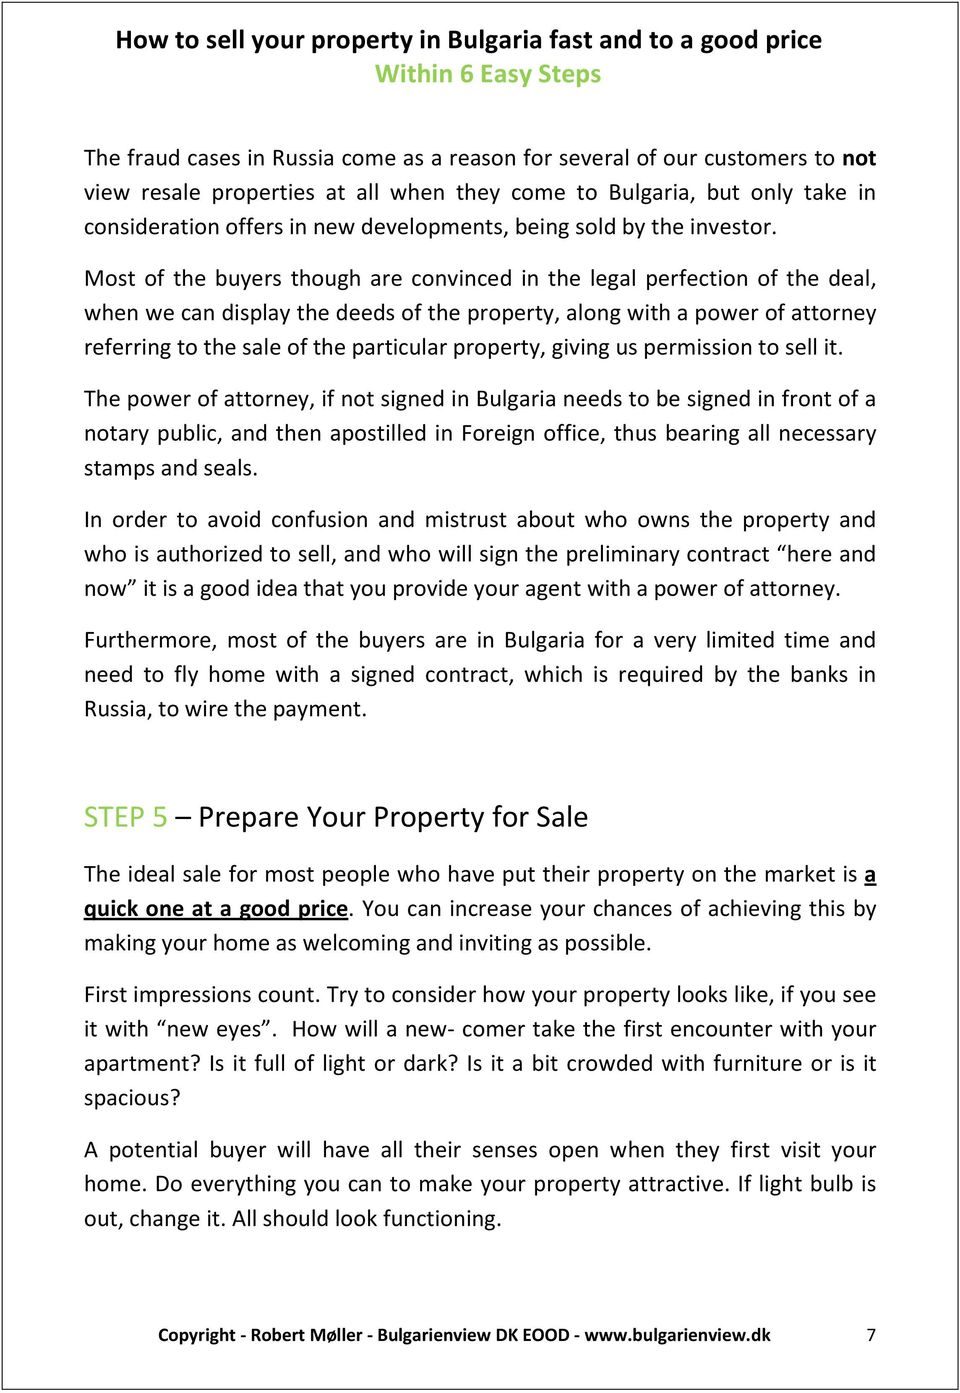 Most of the buyers though are convinced in the legal perfection of the deal, when we can display the deeds of the property, along with a power of attorney referring to the sale of the particular